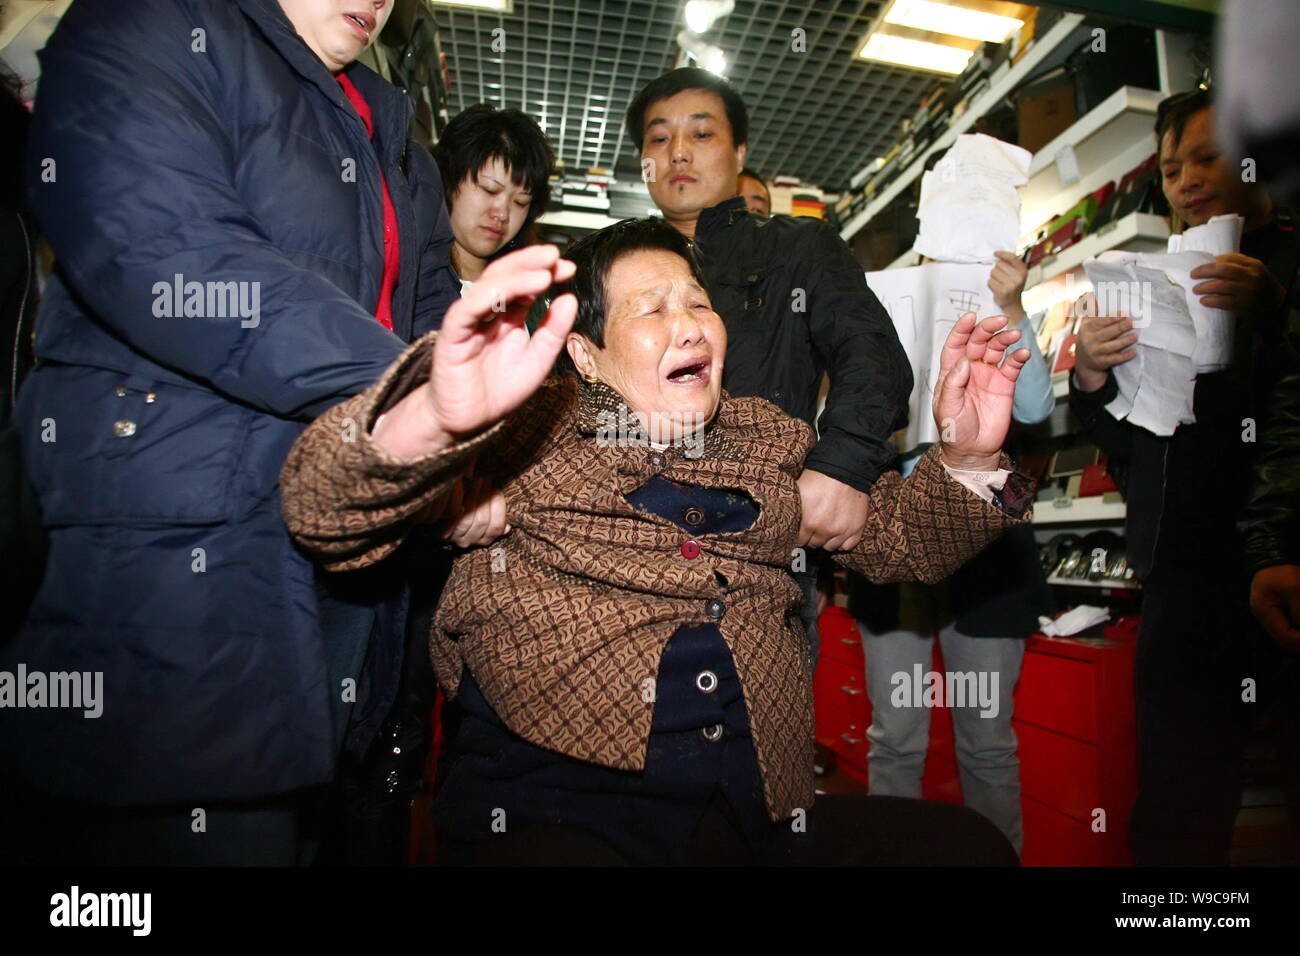 A Chinese elderly woman, middle, the mother of a Chinese stall owner who is suspected of selling fake goods, reacts while security guards and administ Stock Photo